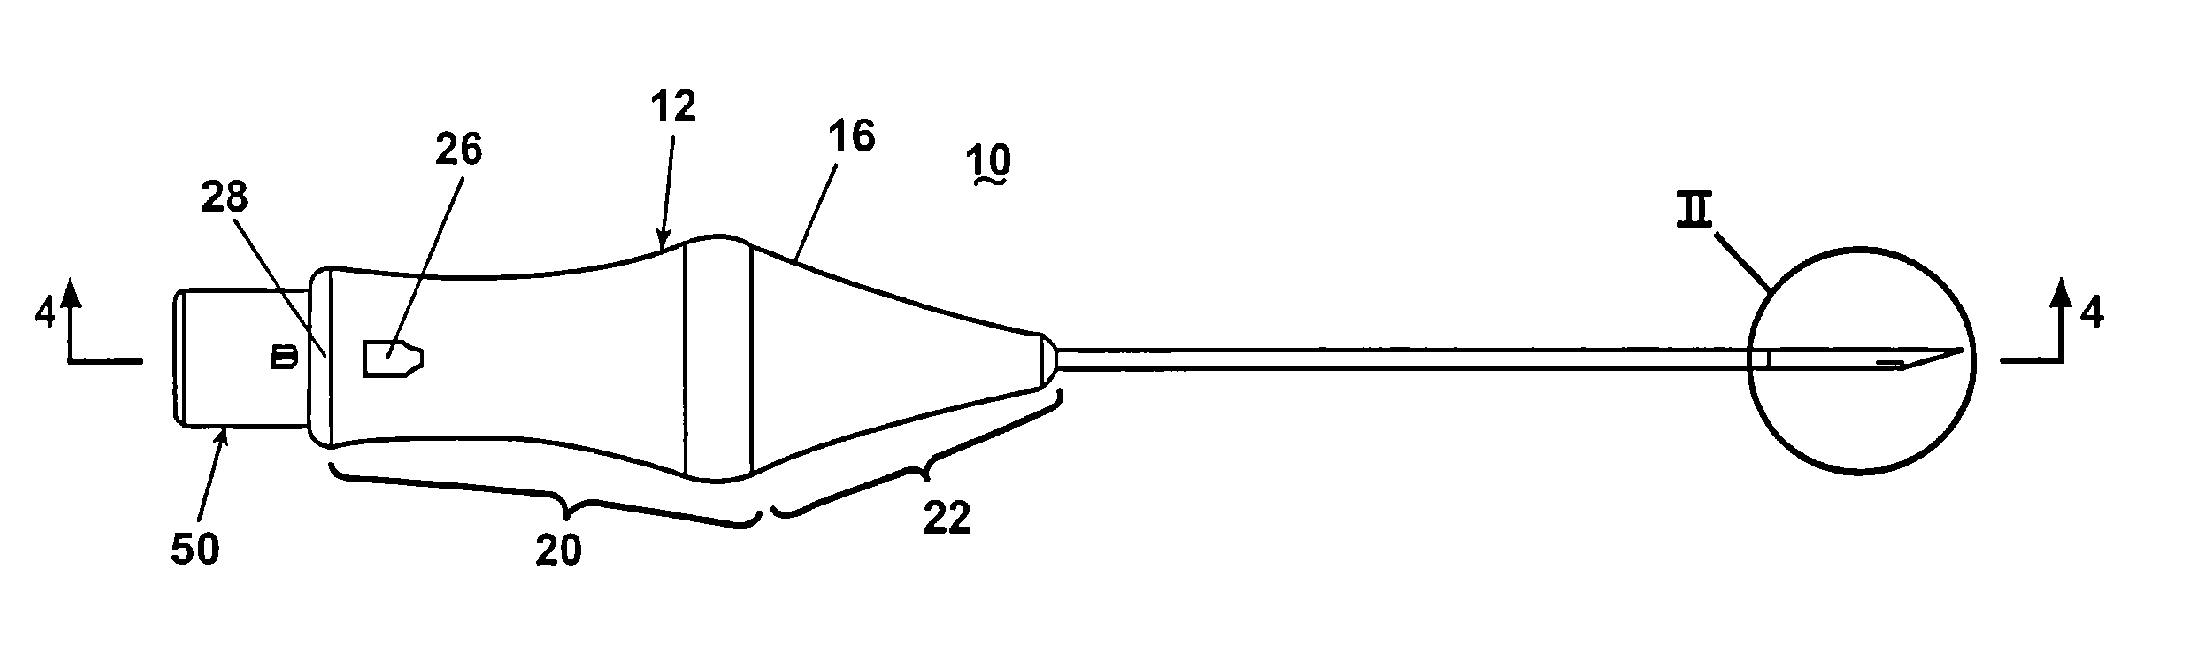 Apparatus for the percutaneous marking of a lesion